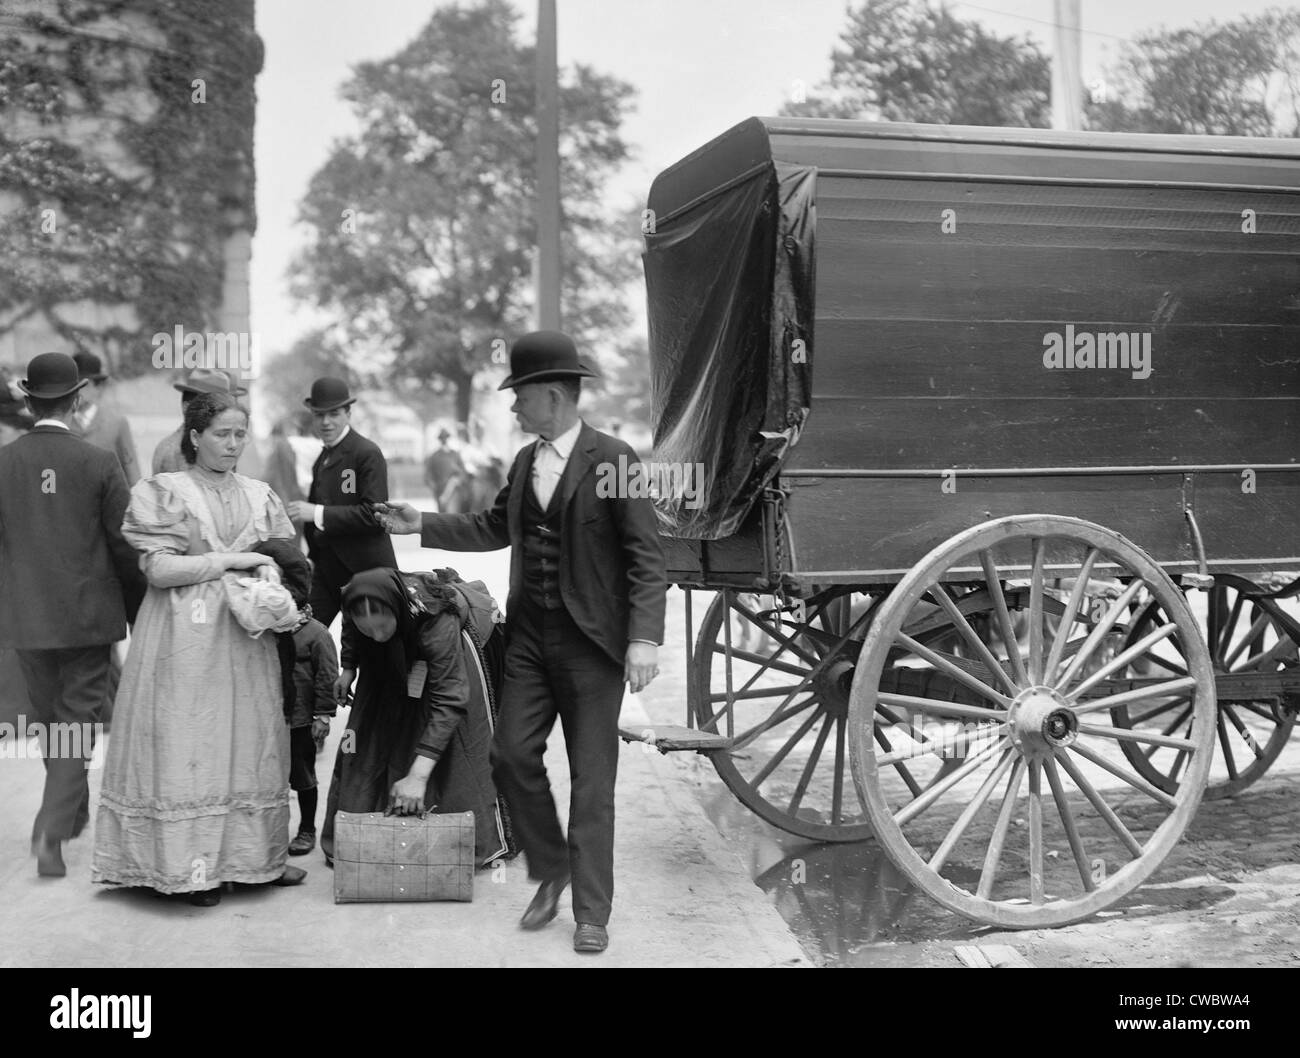 Two women immigrants and a child engage a wagon for transport to their next stop, probably a boarding house or railroad Stock Photo